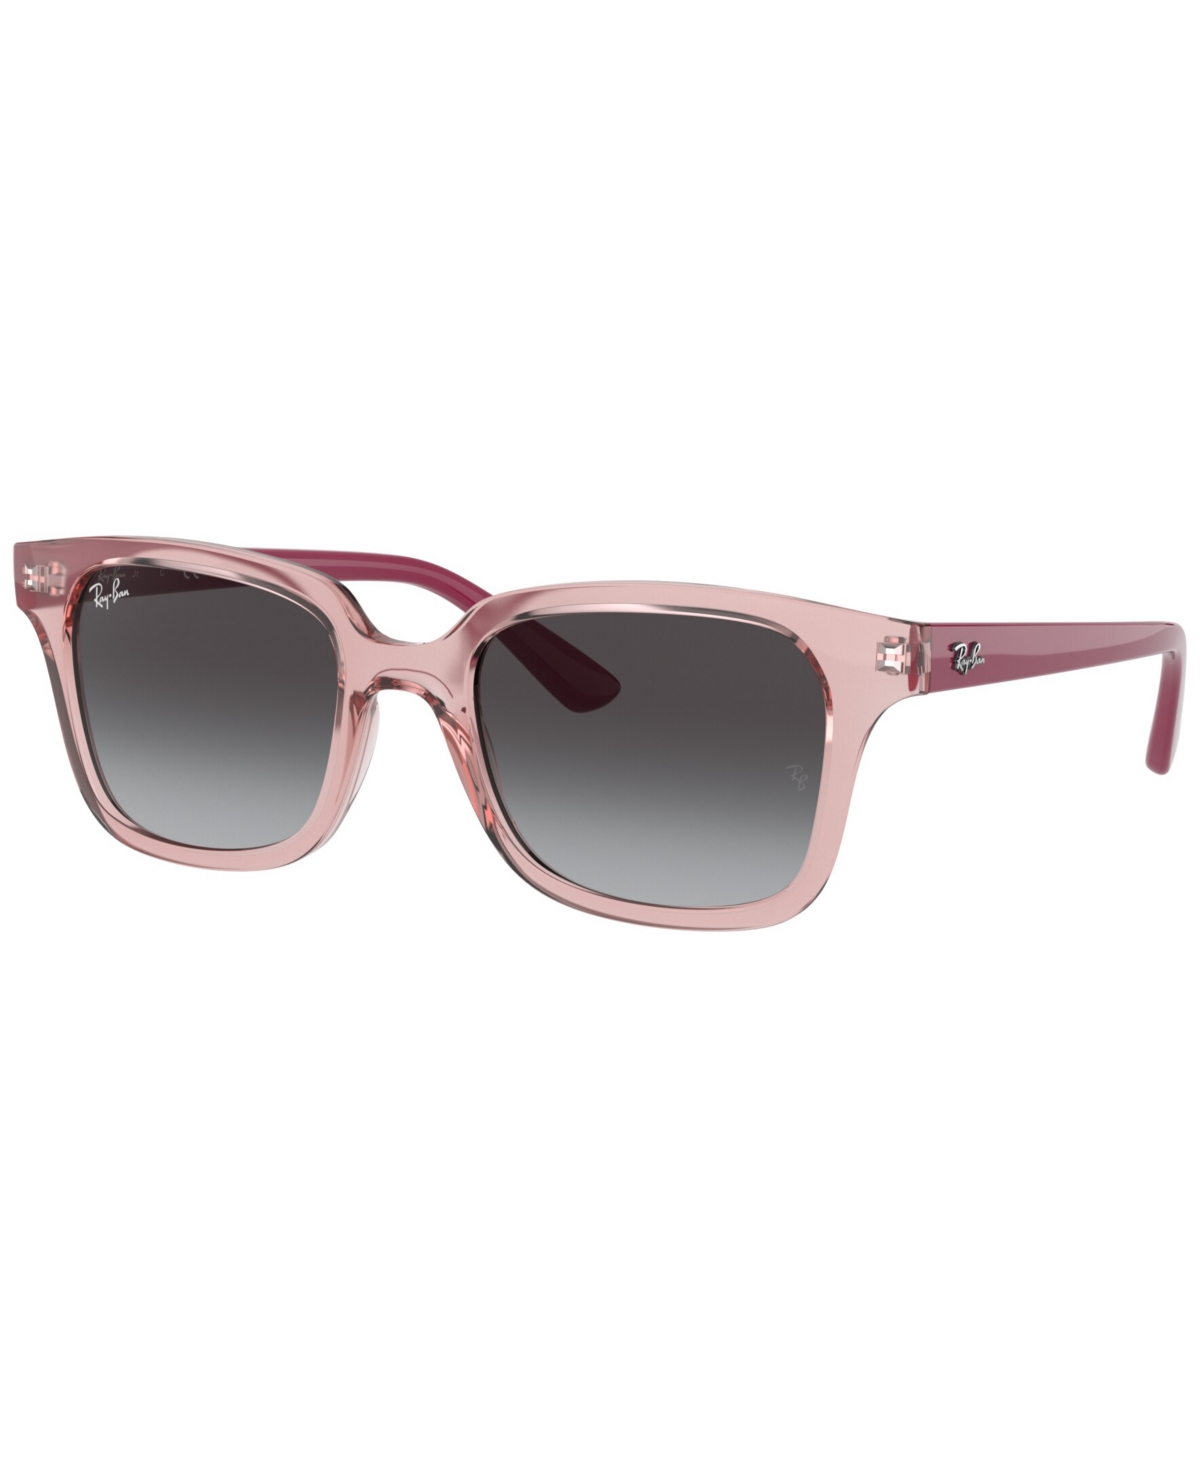 Ray-ban Jr Kids Sunglasses, Rb9071s In Transparent Pink